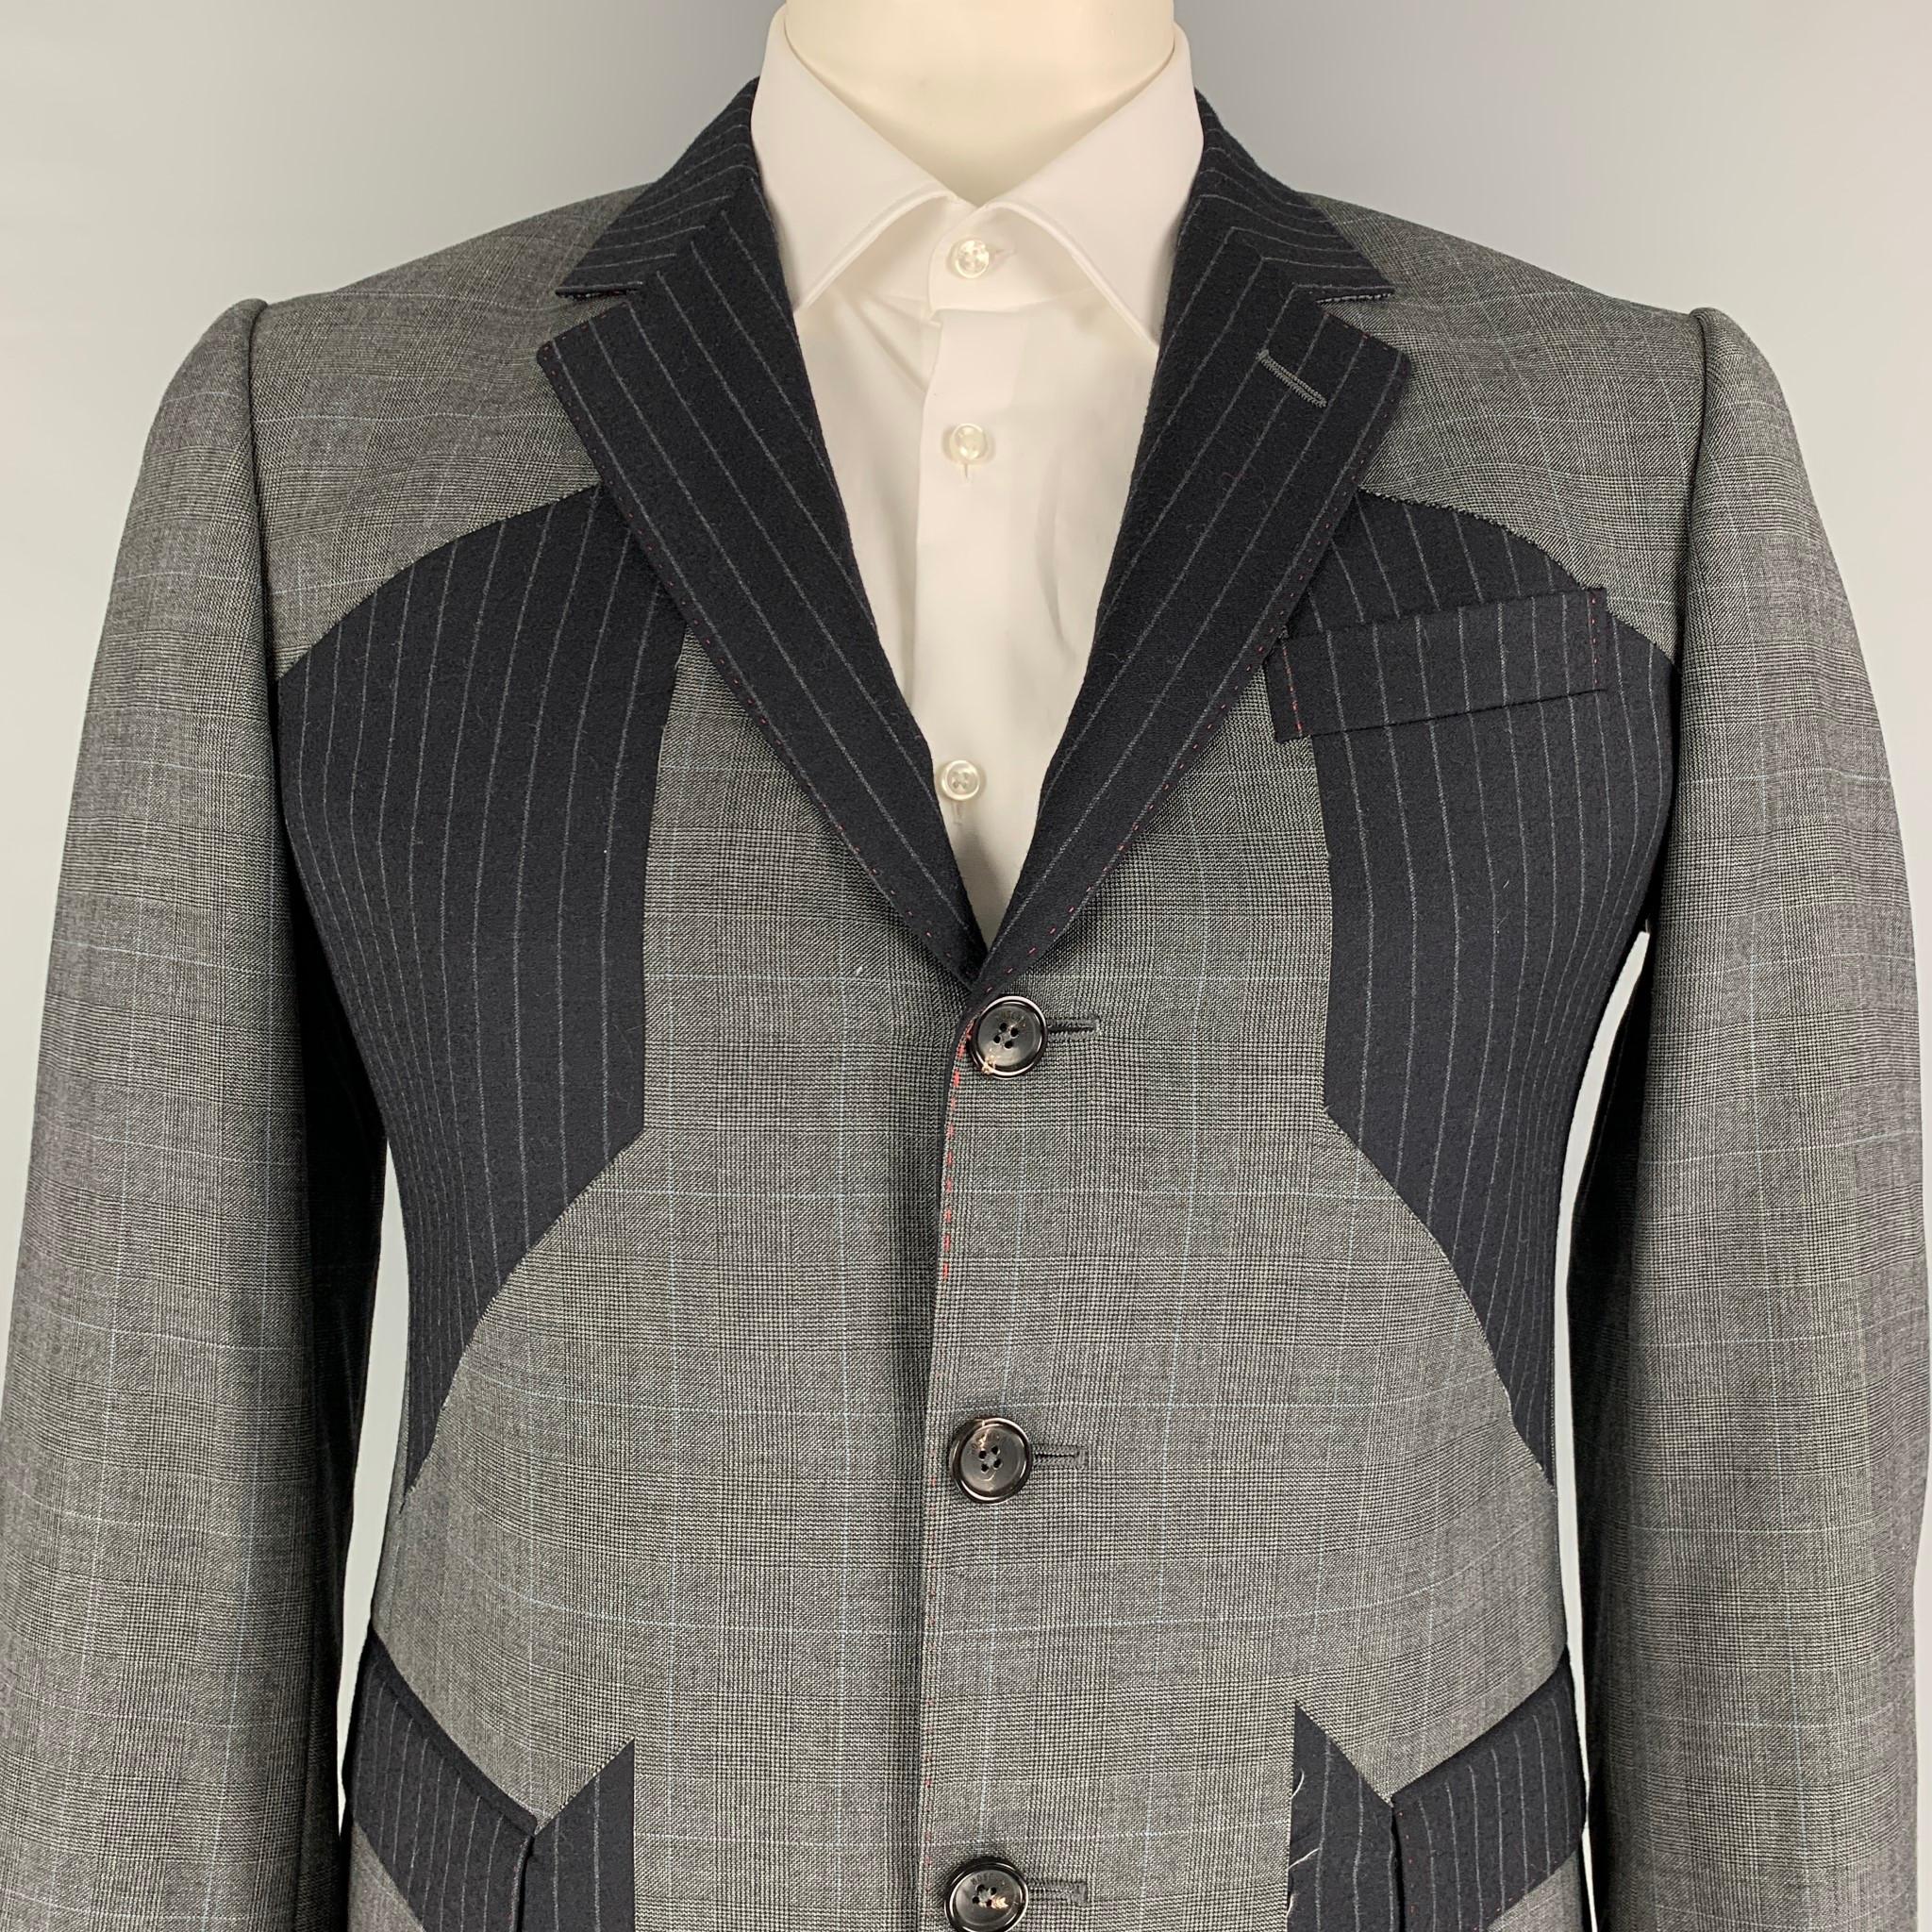 MOSCHINO sport coat comes in a grey & navy patchwork wool with a full liner featuring a notch lapel, flap pockets, double back vent, and a three button closure. Made in Italy. 

Excellent Pre-Owned Condition.
Marked: 52

Measurements:

Shoulder: 18